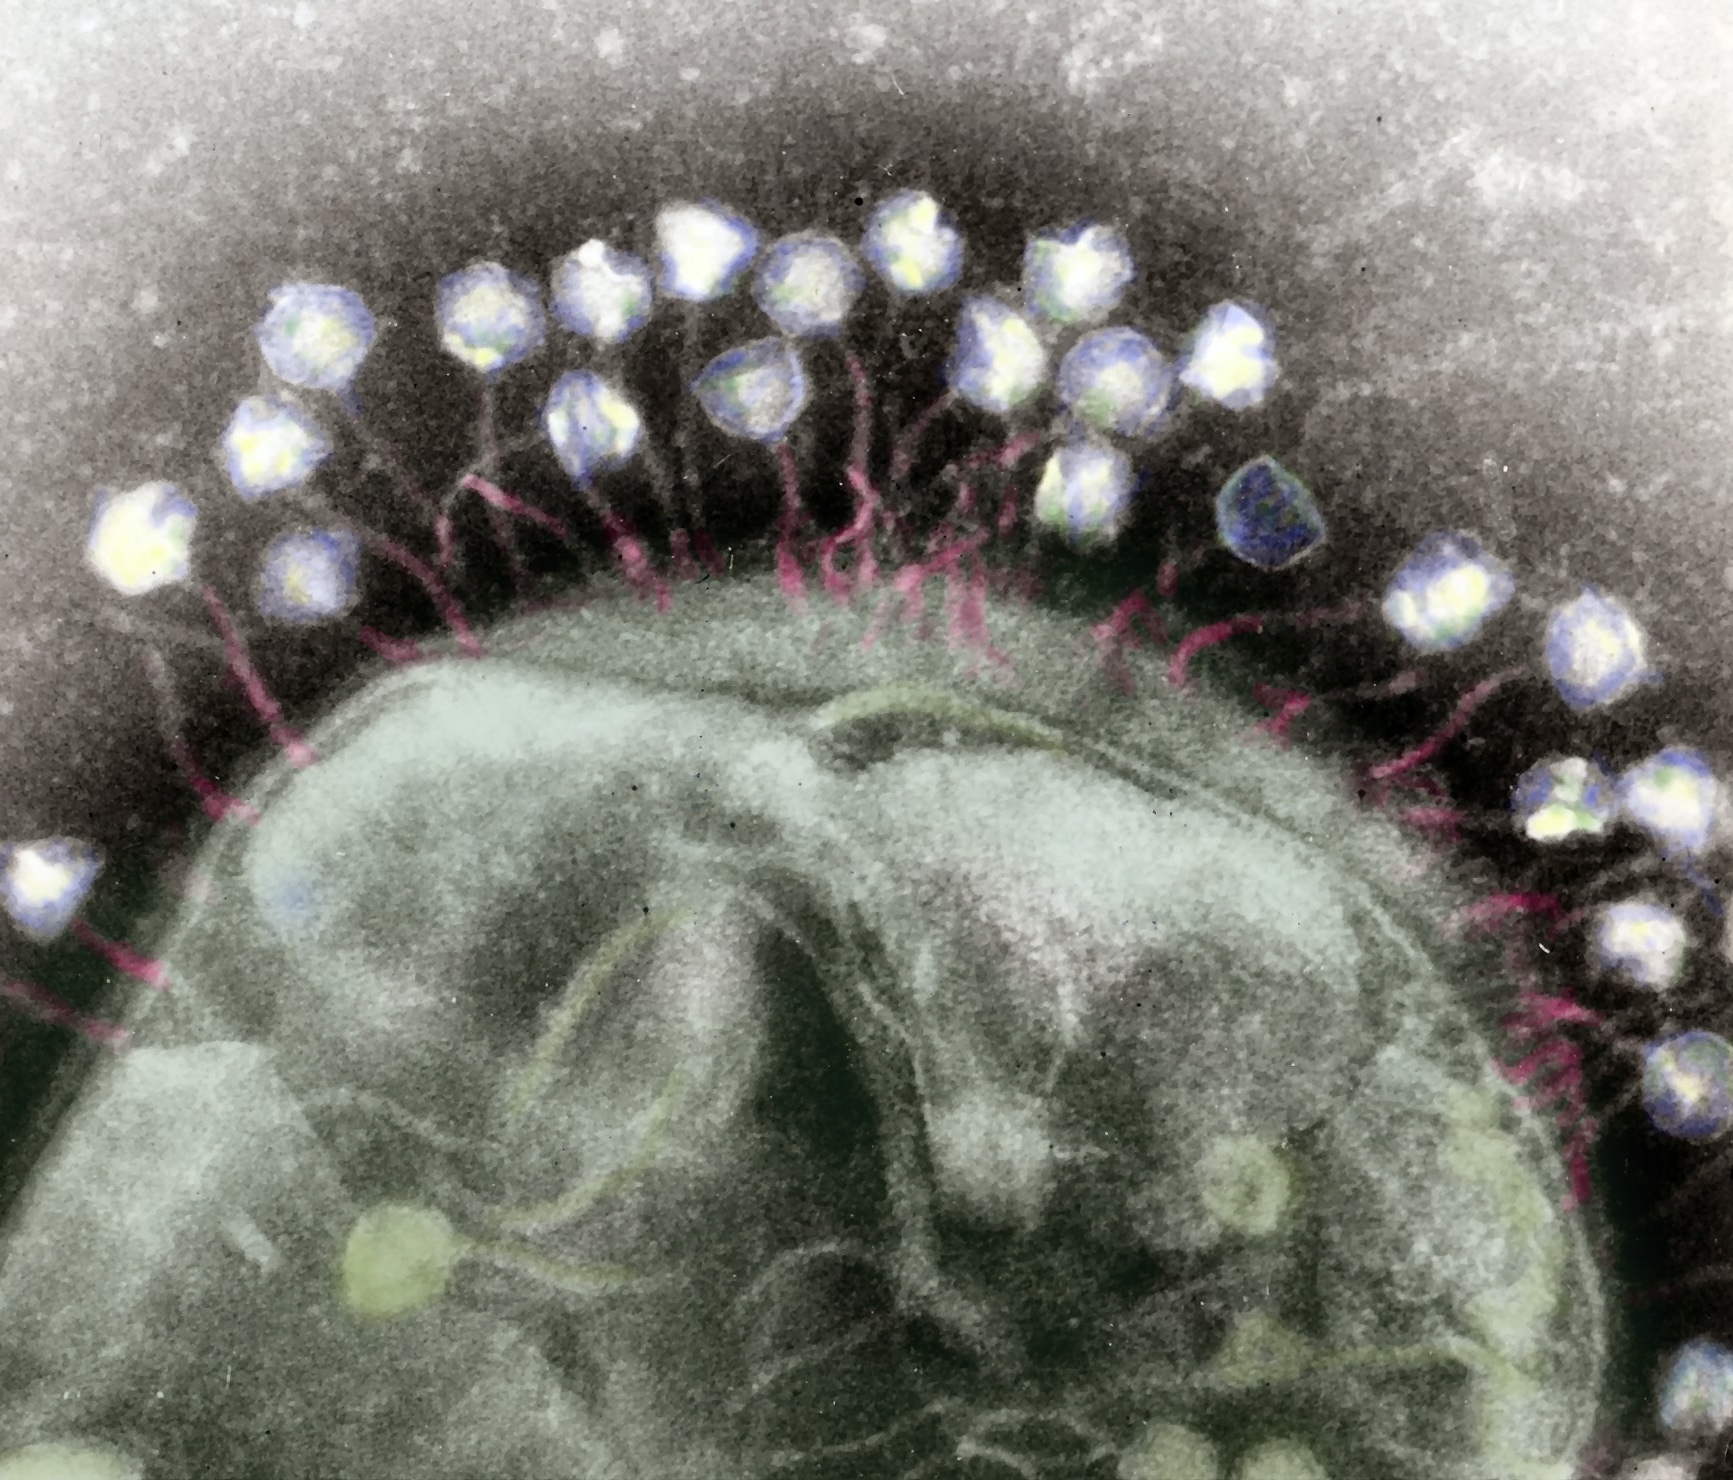 A microscopy image of phages attacking a bacterium